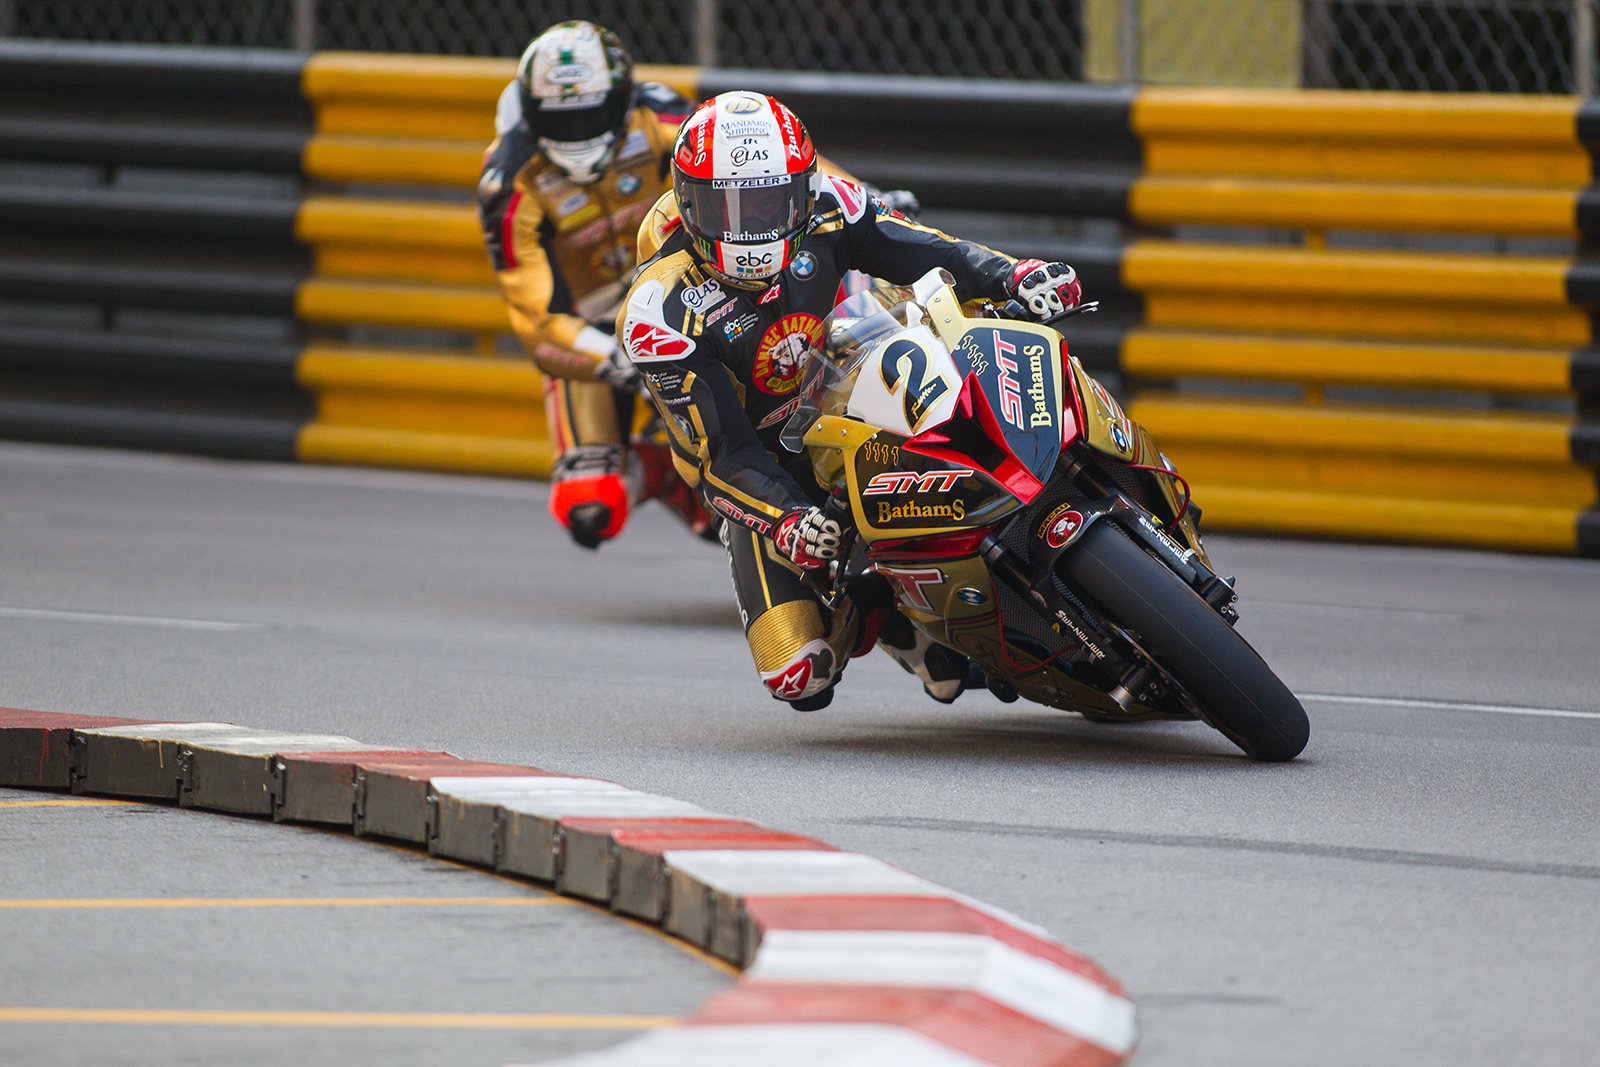 50th Macau Motorcycle Grand Prix – First Practice Report